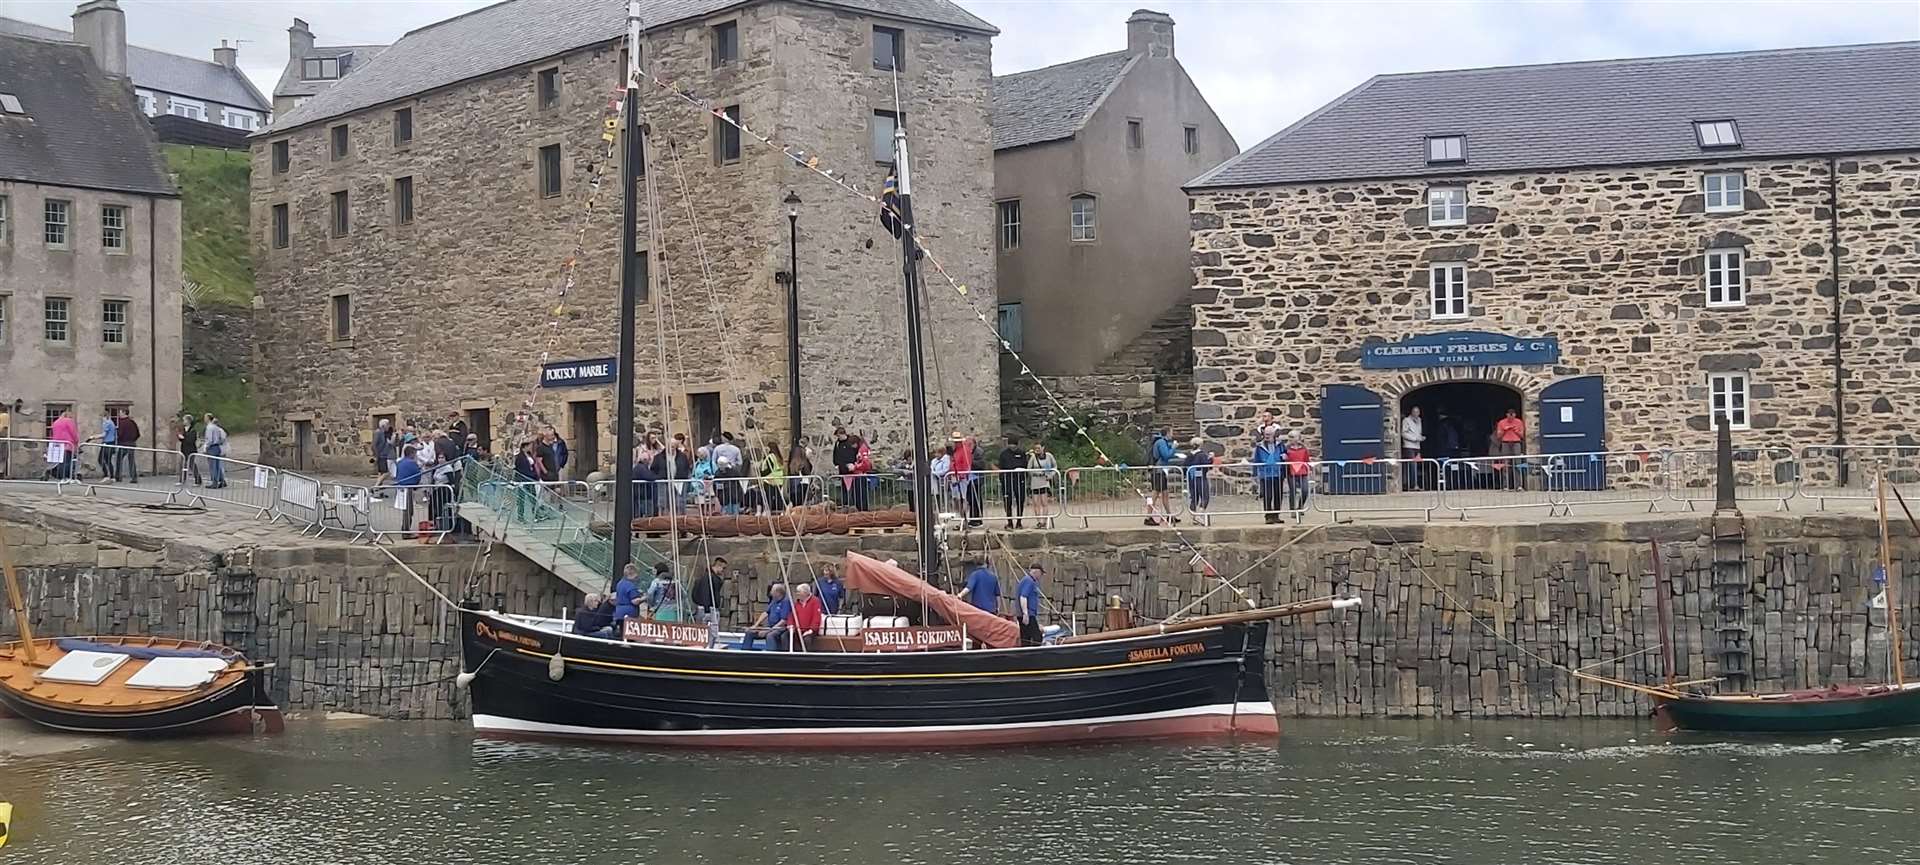 The Isabella Fortuna which sailed from Wick to be part of the festival.